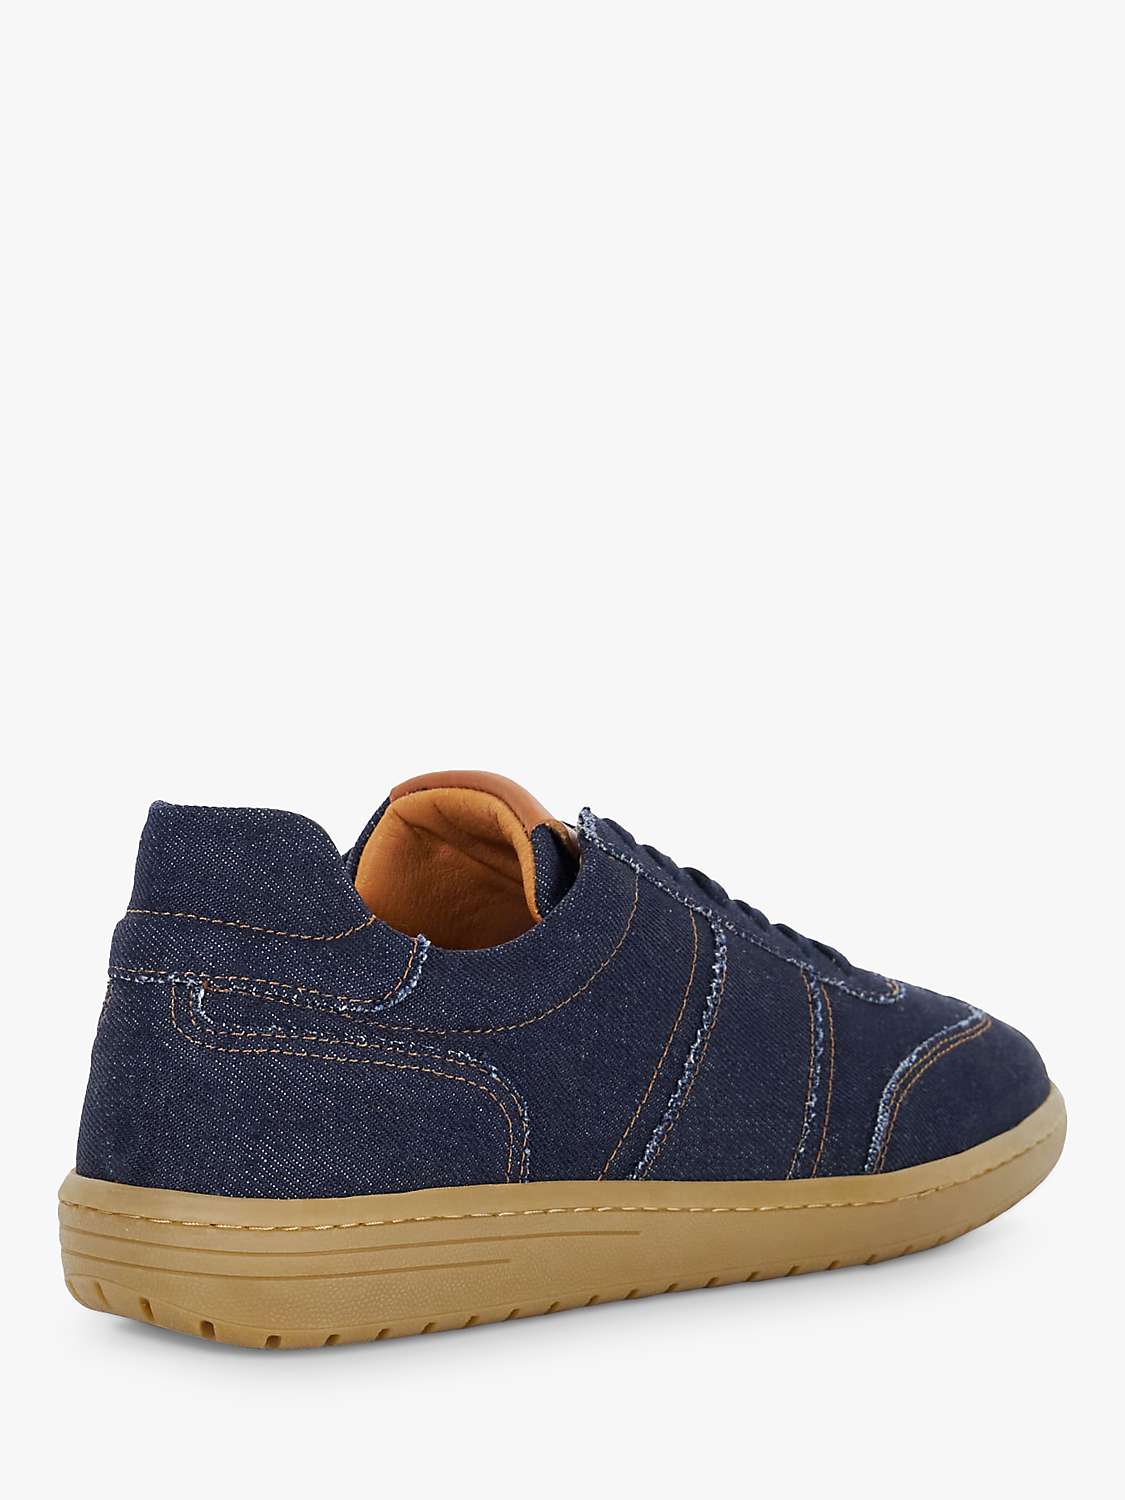 Buy Dune Torress Suede Low Profile Retro Trainers, Blue Online at johnlewis.com